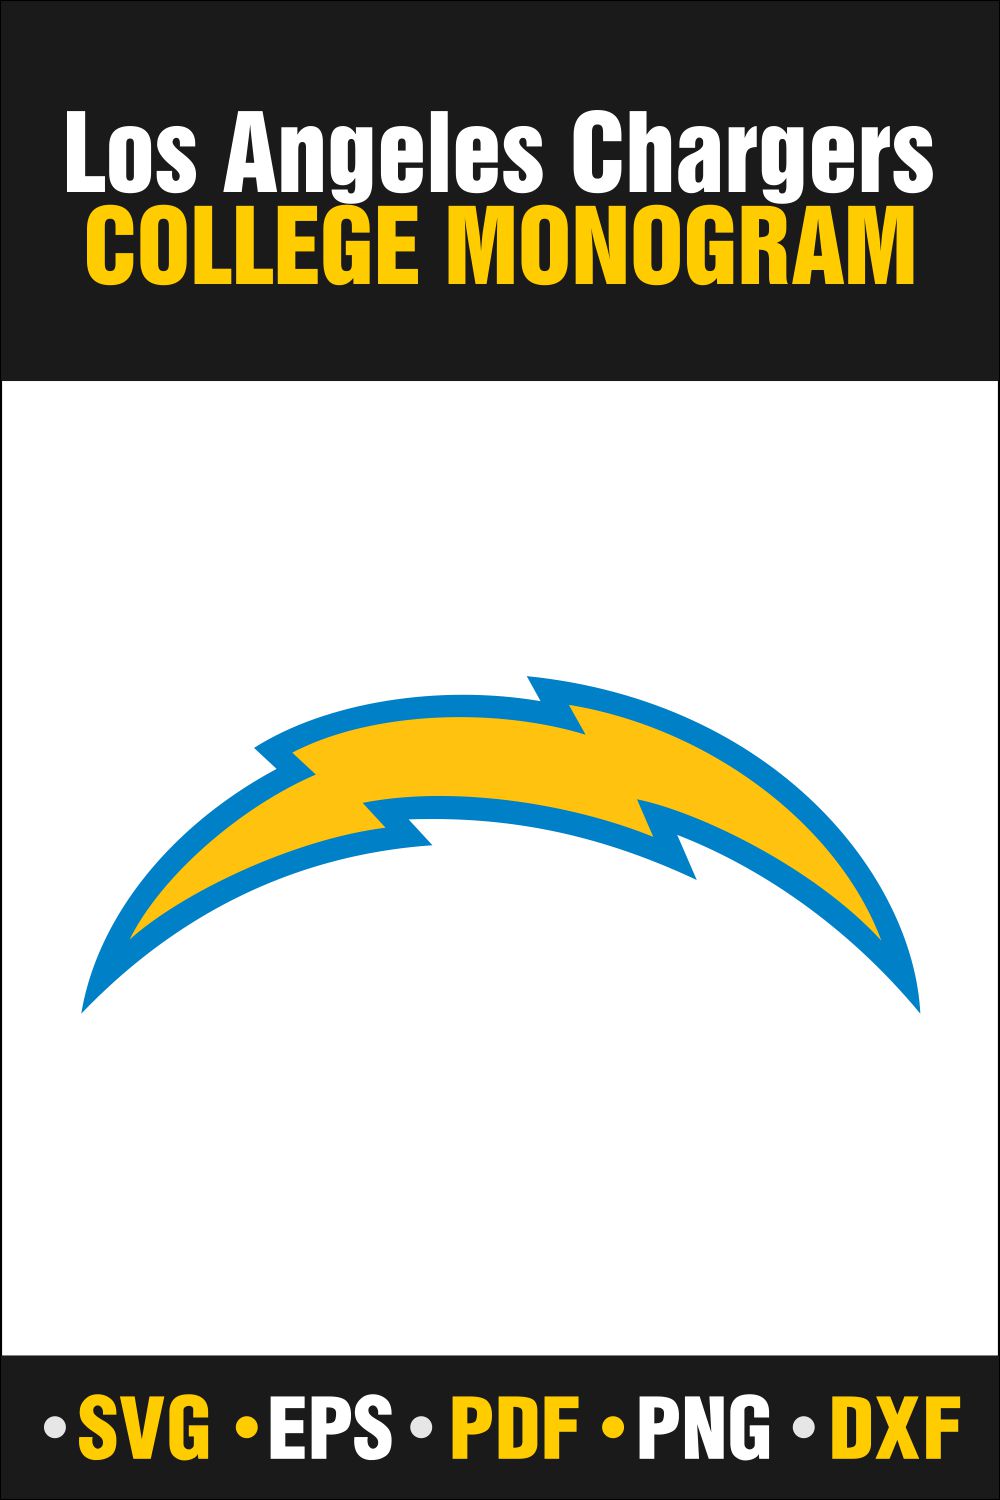 Los Angeles Chargers SVG, PDF, PNG, DXF, EPS - Only $2 pinterest preview image.